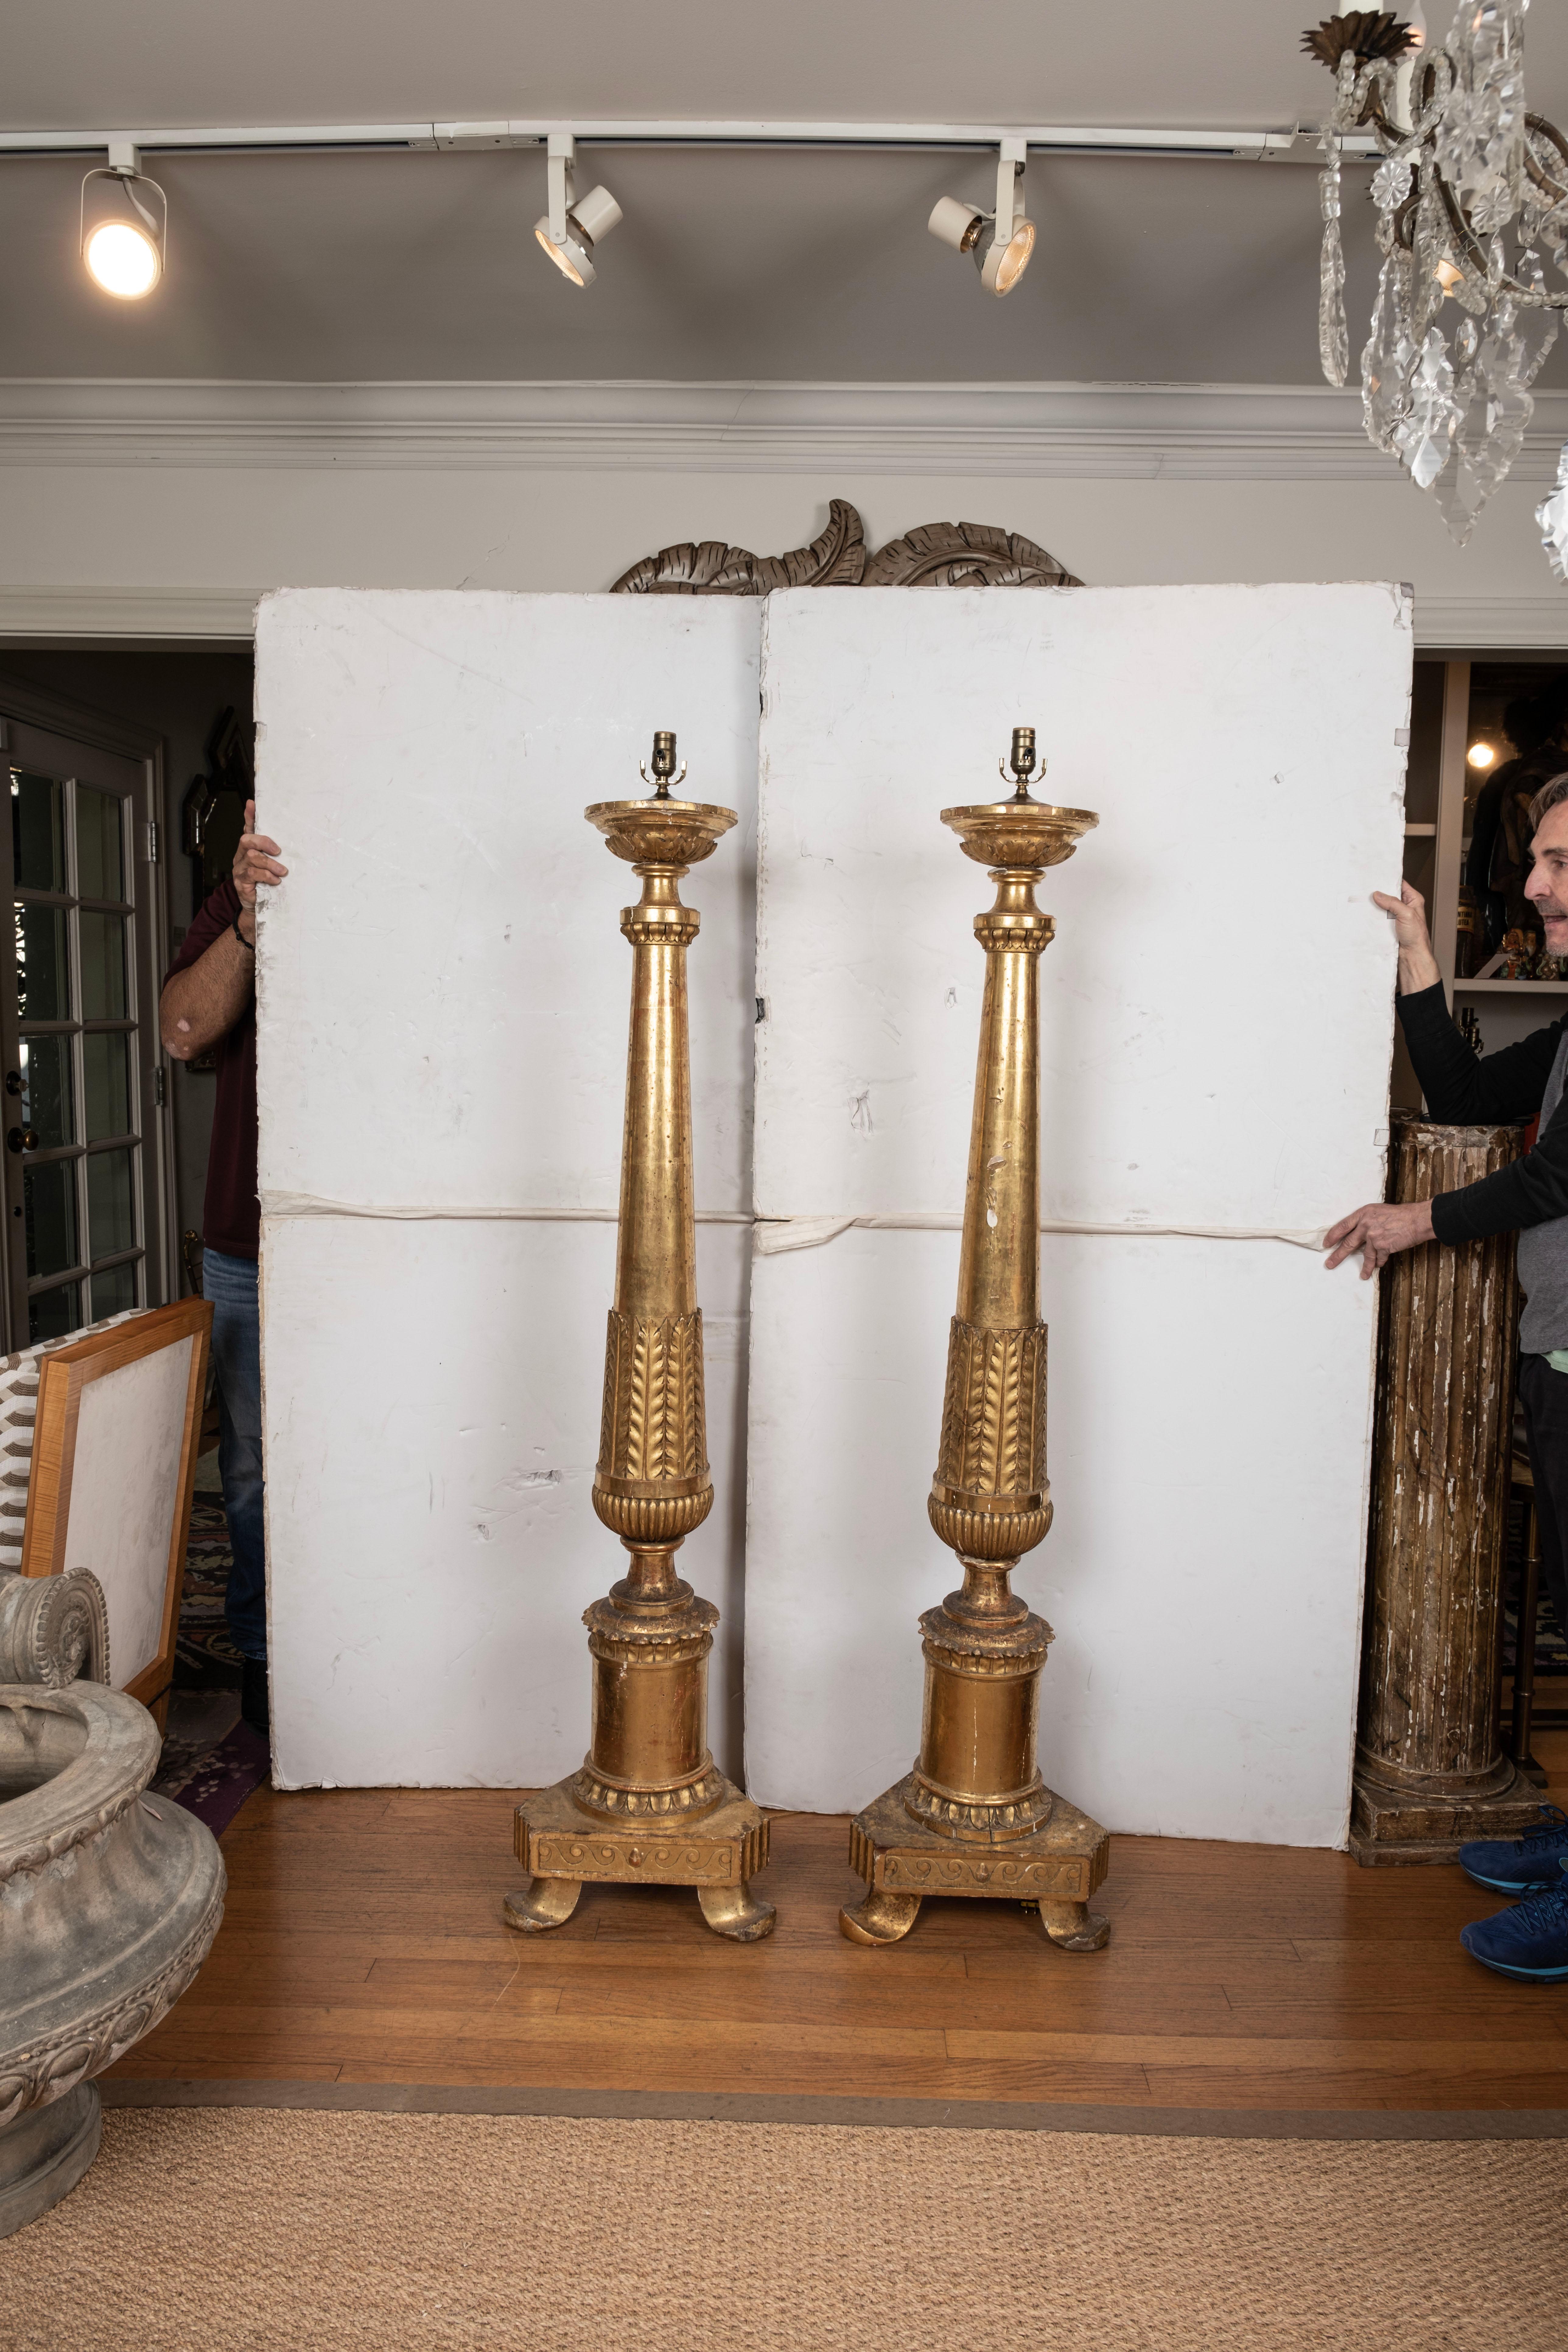 Pair of 18th century Italian giltwood torchieres.
This lovely pair of 18th century Italian Louis XVI period gilt wood torchieres, torcheres or floor lamps have been newly French wired for U.S. use. Our beautiful antique Italian, possible Venetian